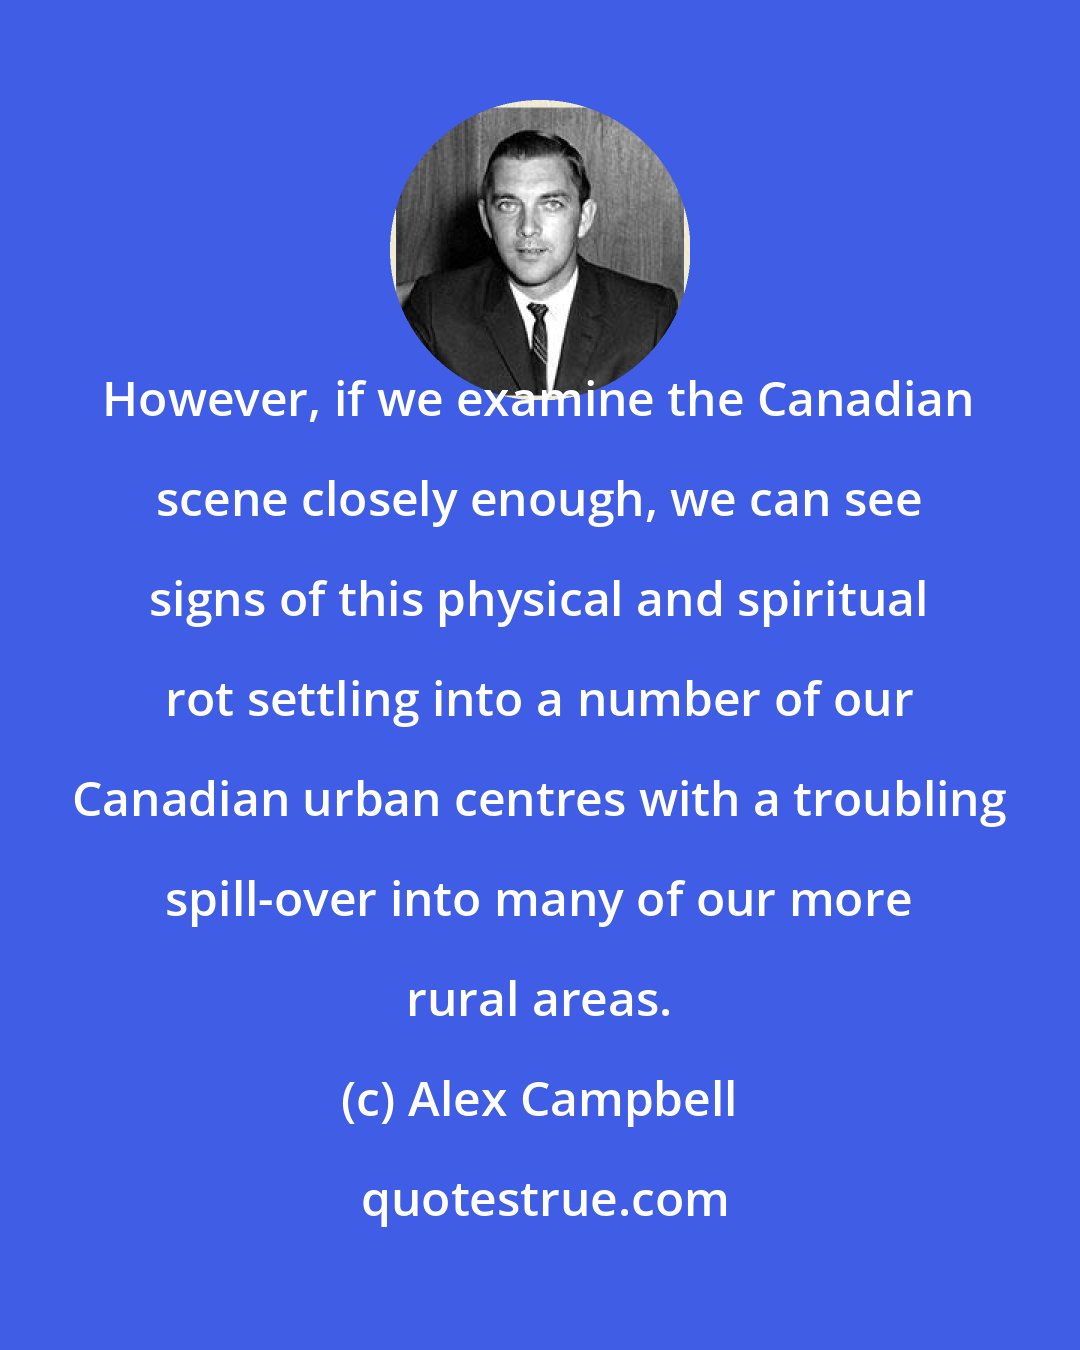 Alex Campbell: However, if we examine the Canadian scene closely enough, we can see signs of this physical and spiritual rot settling into a number of our Canadian urban centres with a troubling spill-over into many of our more rural areas.